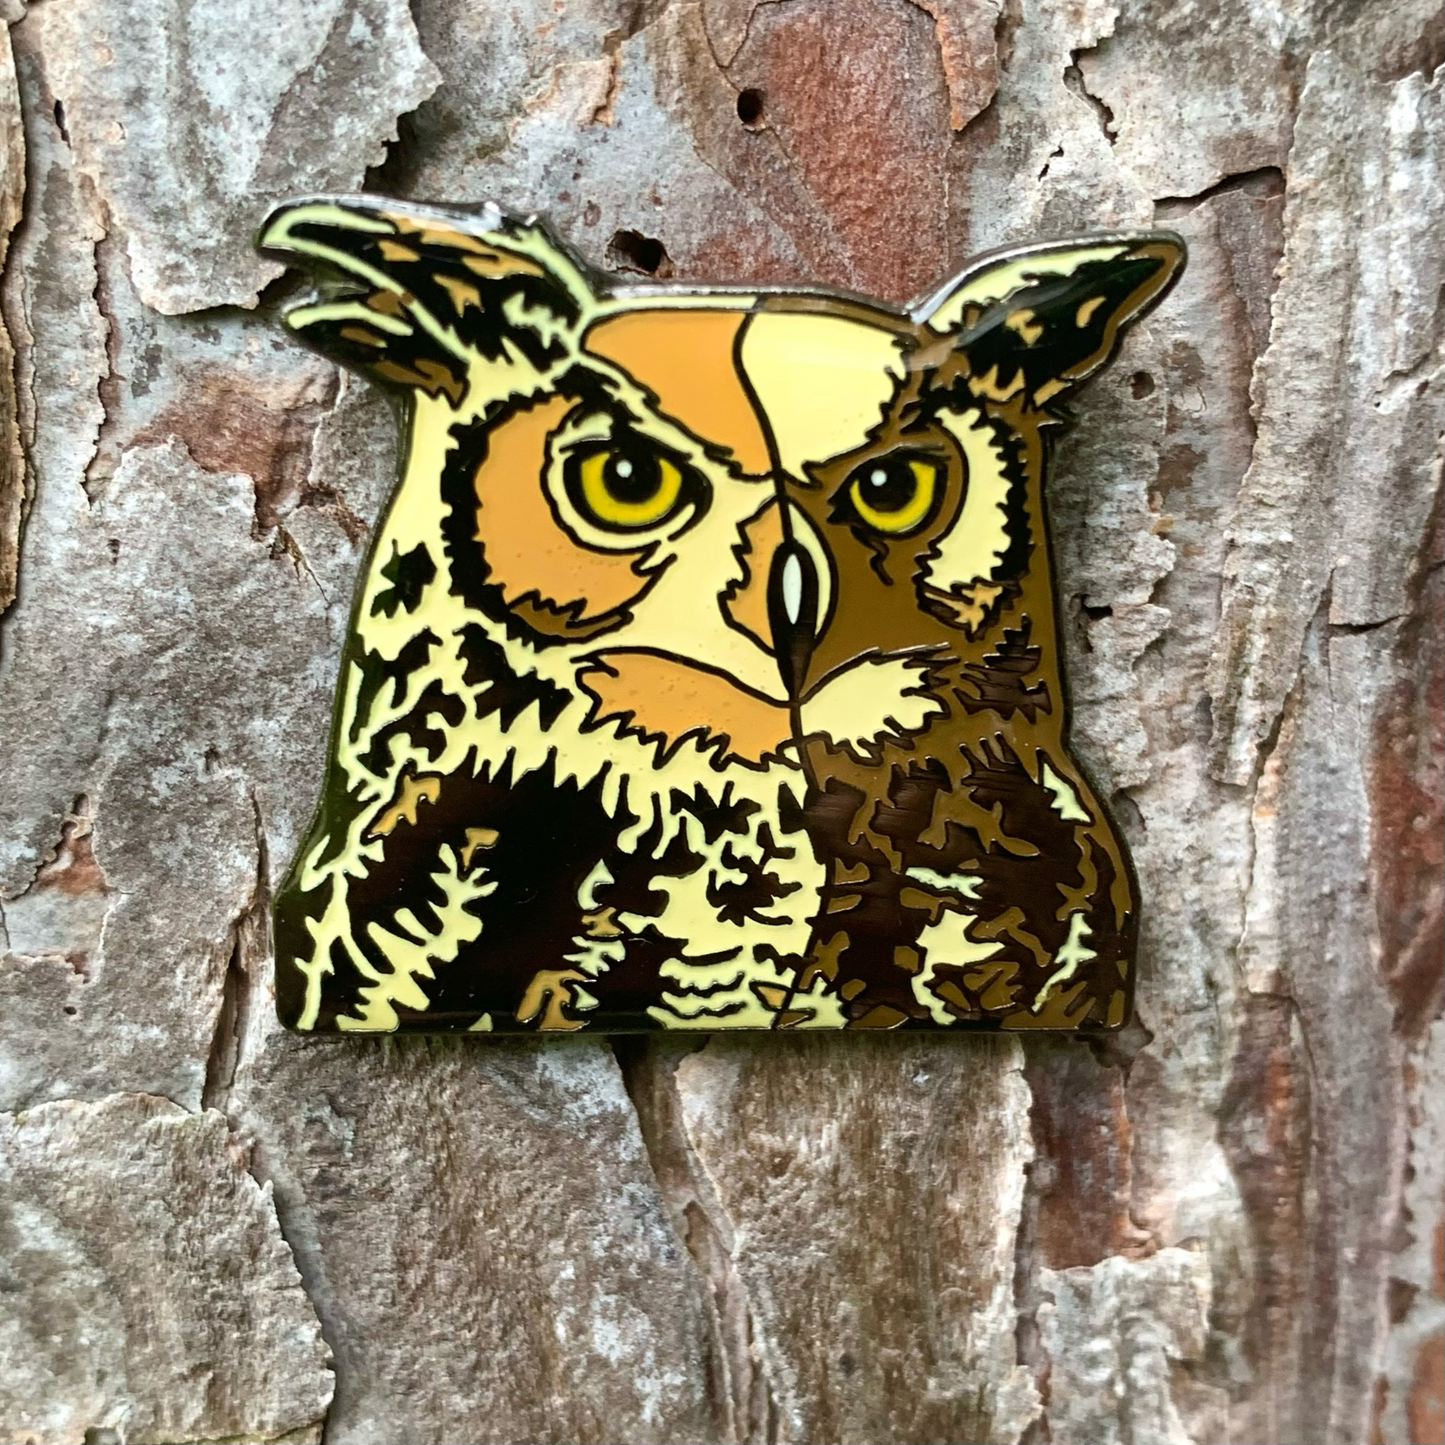 Birds of Prey Friends - Set of Five Pins by Barry Hutzel - Epoxied Soft Enamel Limited Edition Pins